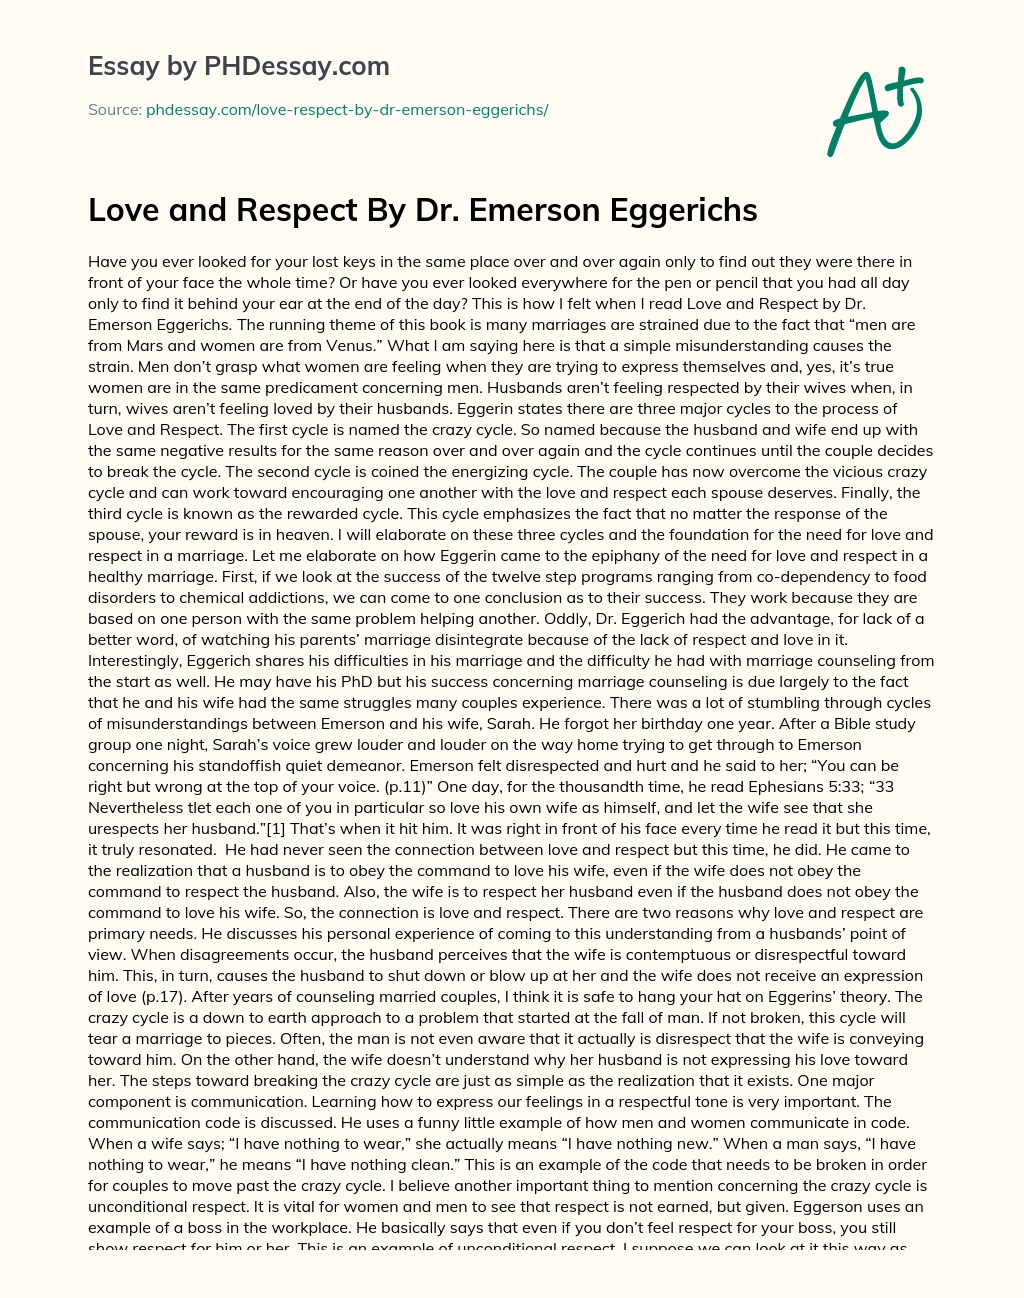 Love and Respect By  Dr. Emerson Eggerichs essay